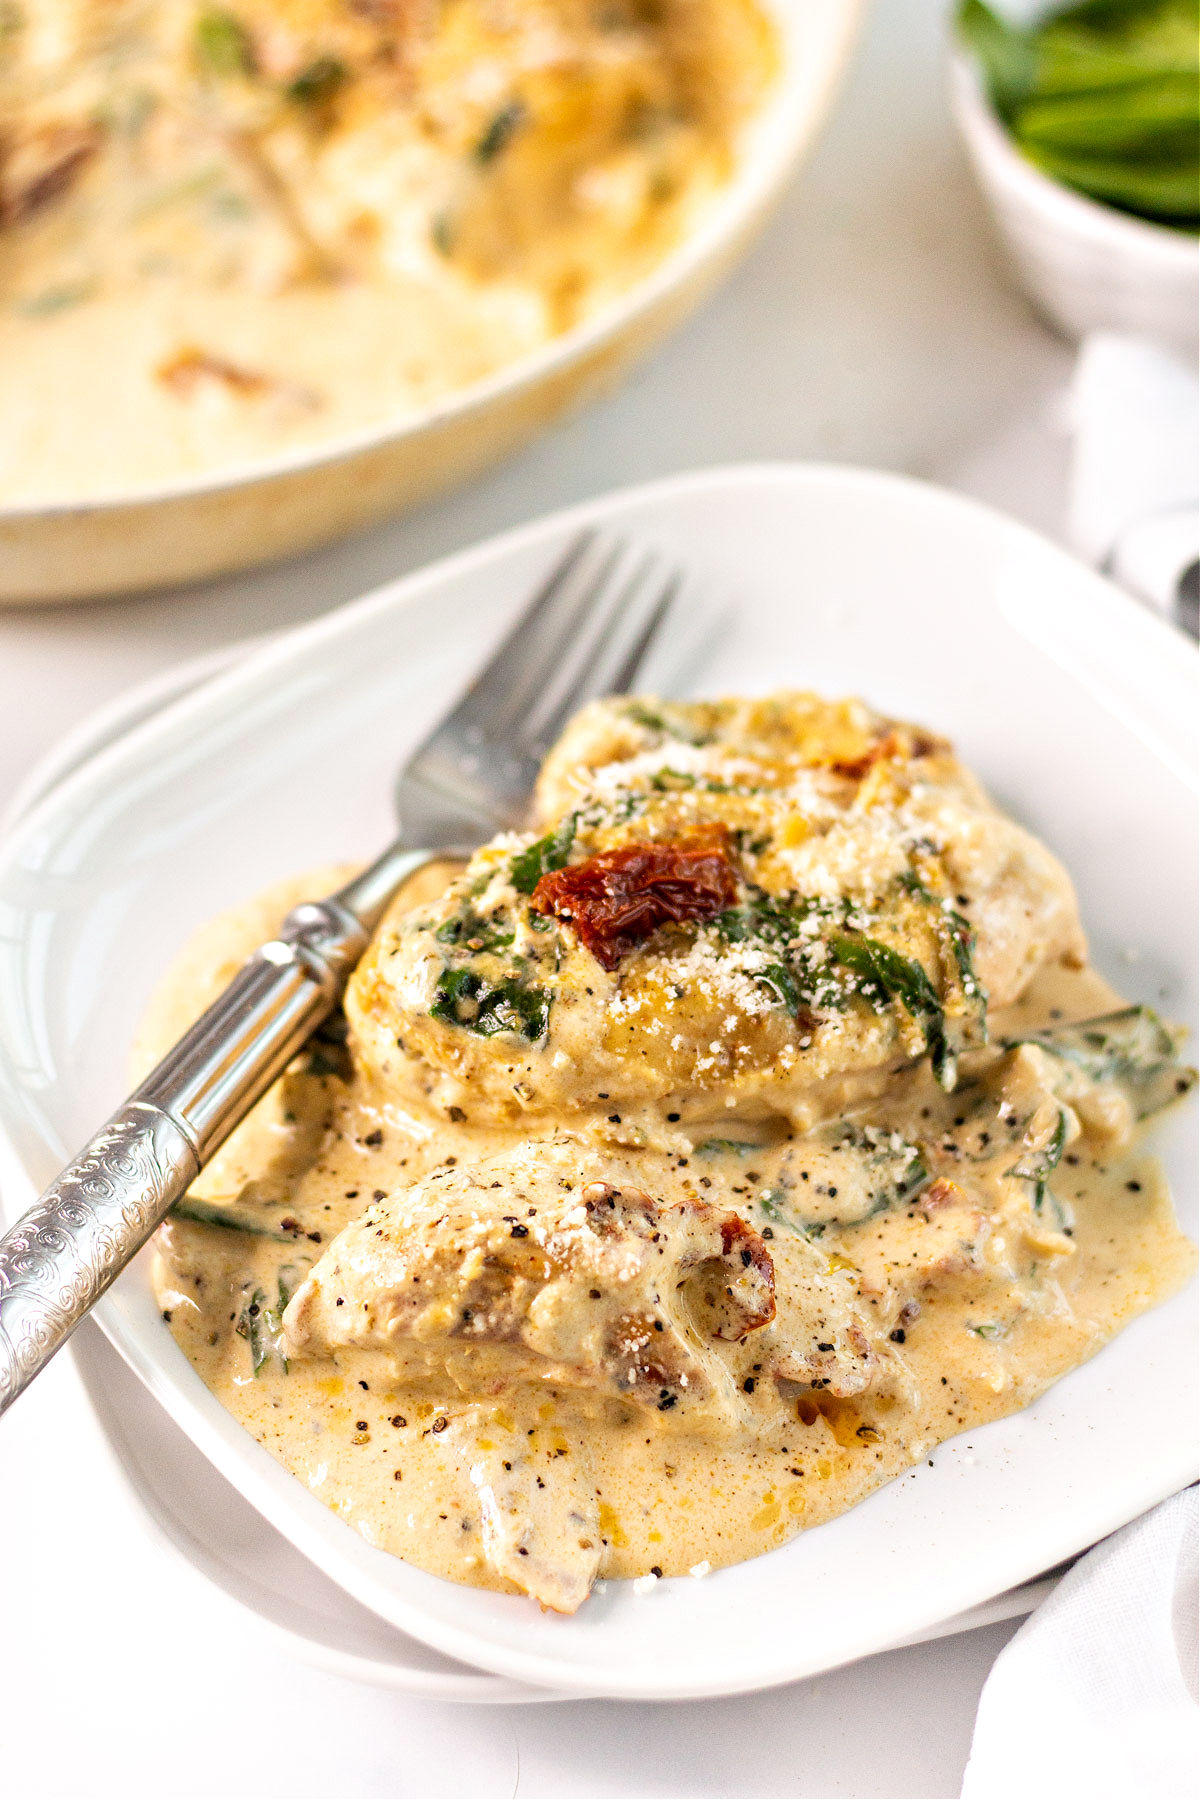 Chicken in creamy spinach sauce served on a white plate.